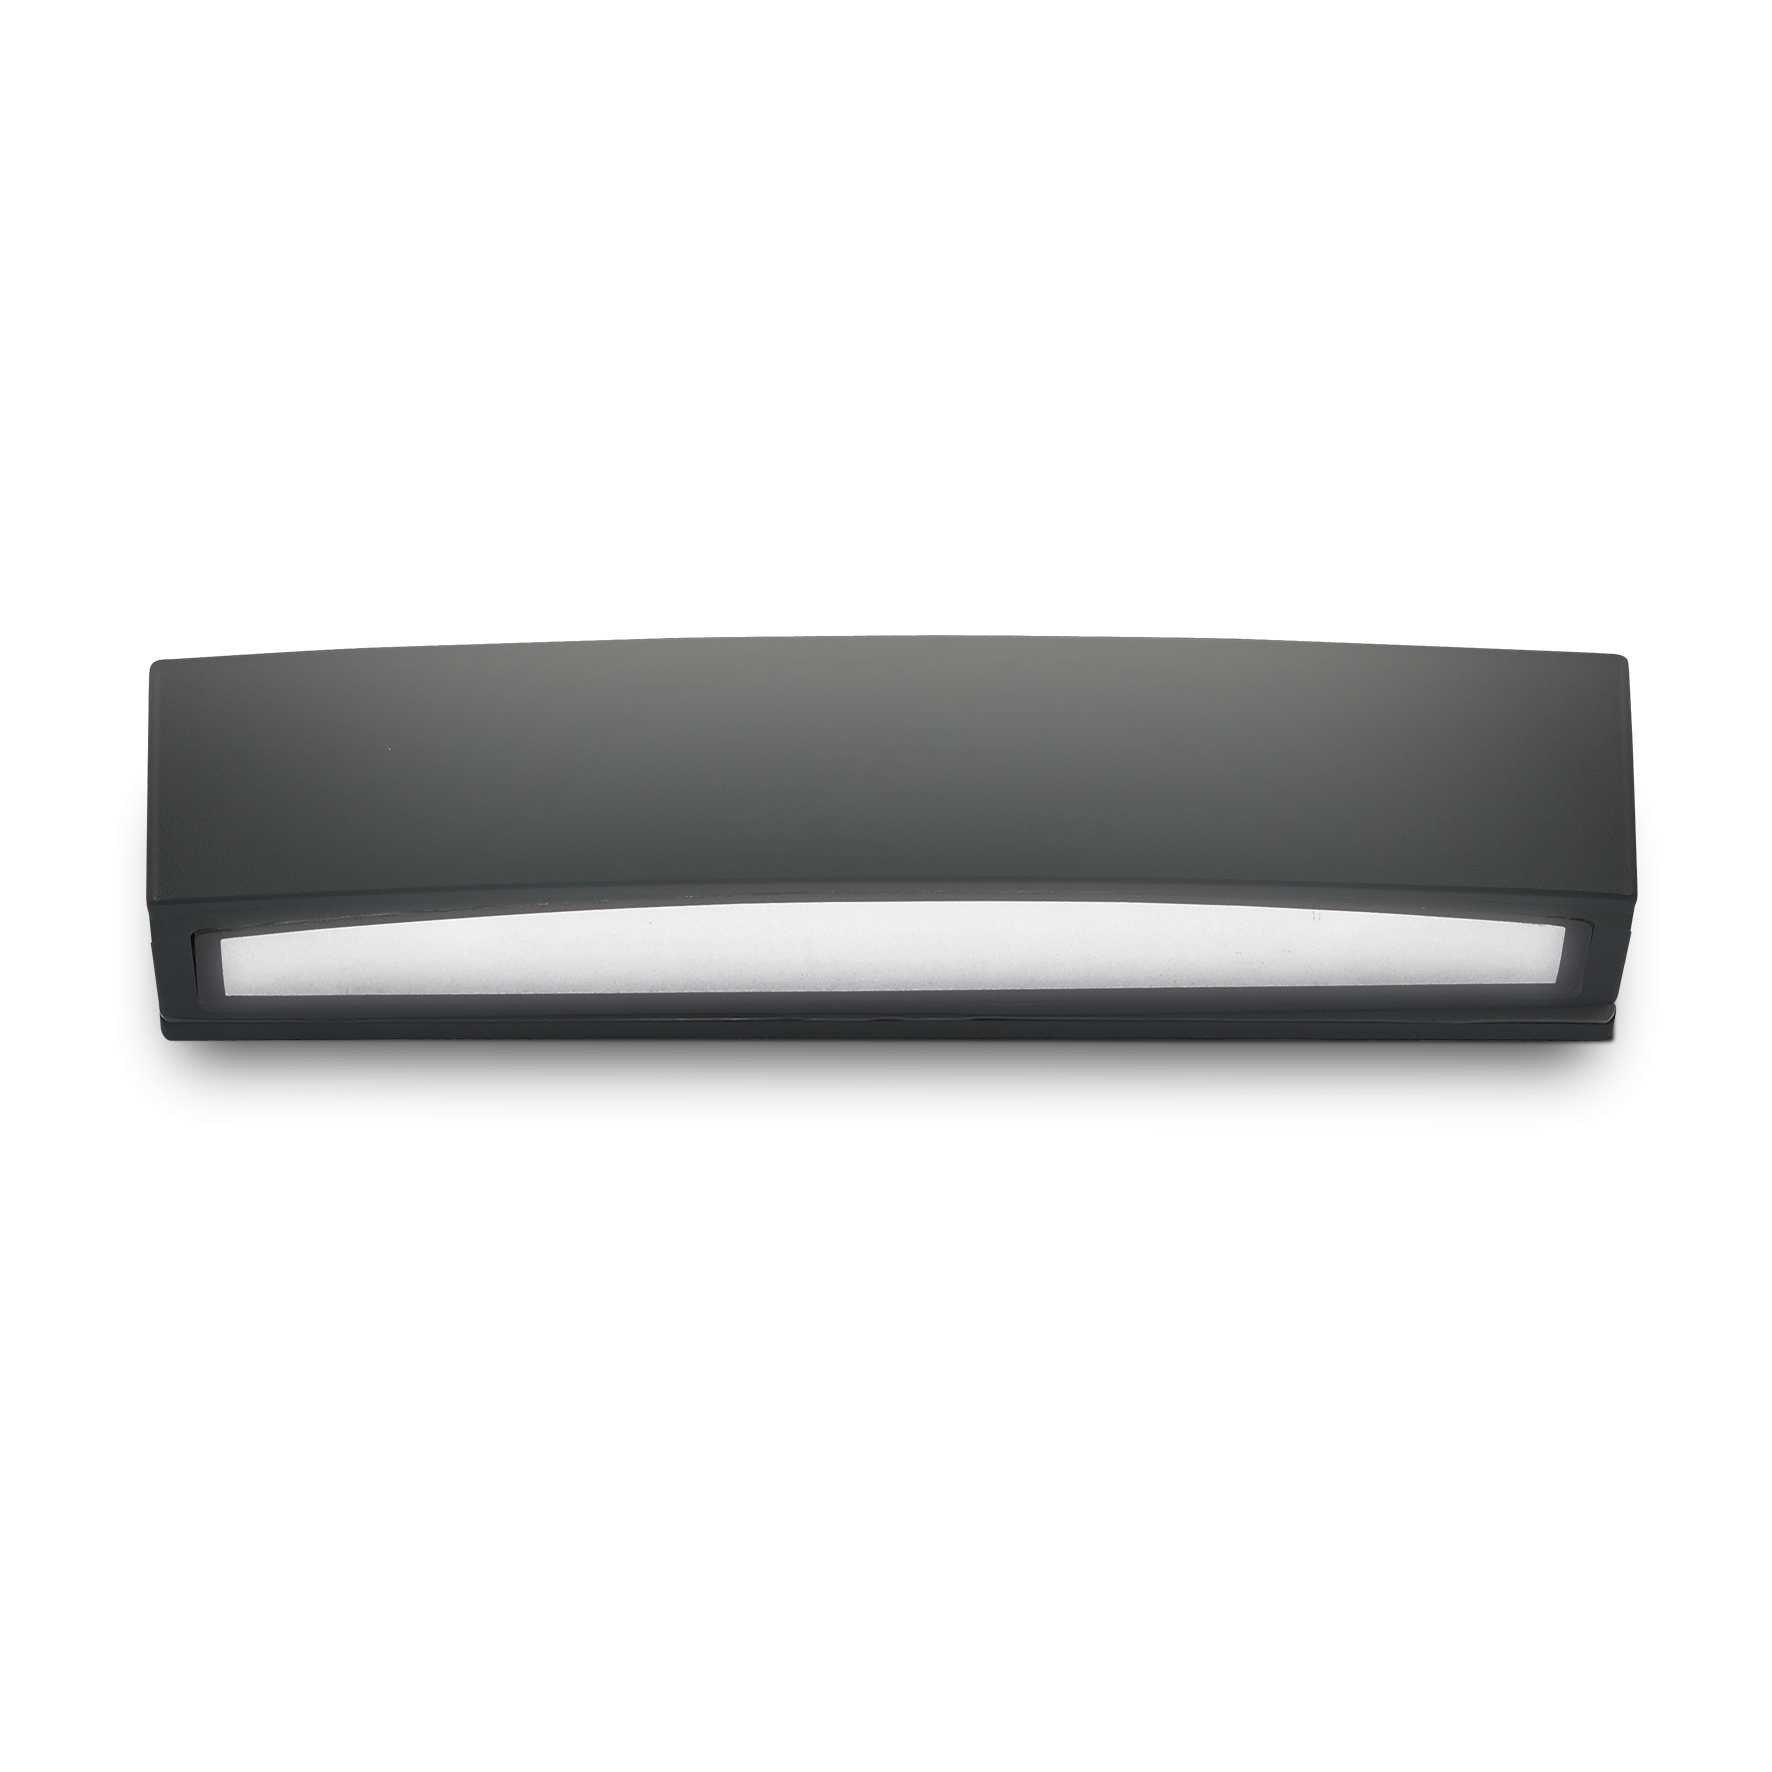 Andromeda 2 Light Outdoor Large Up Down Wall Light Black Putty IP54 E27